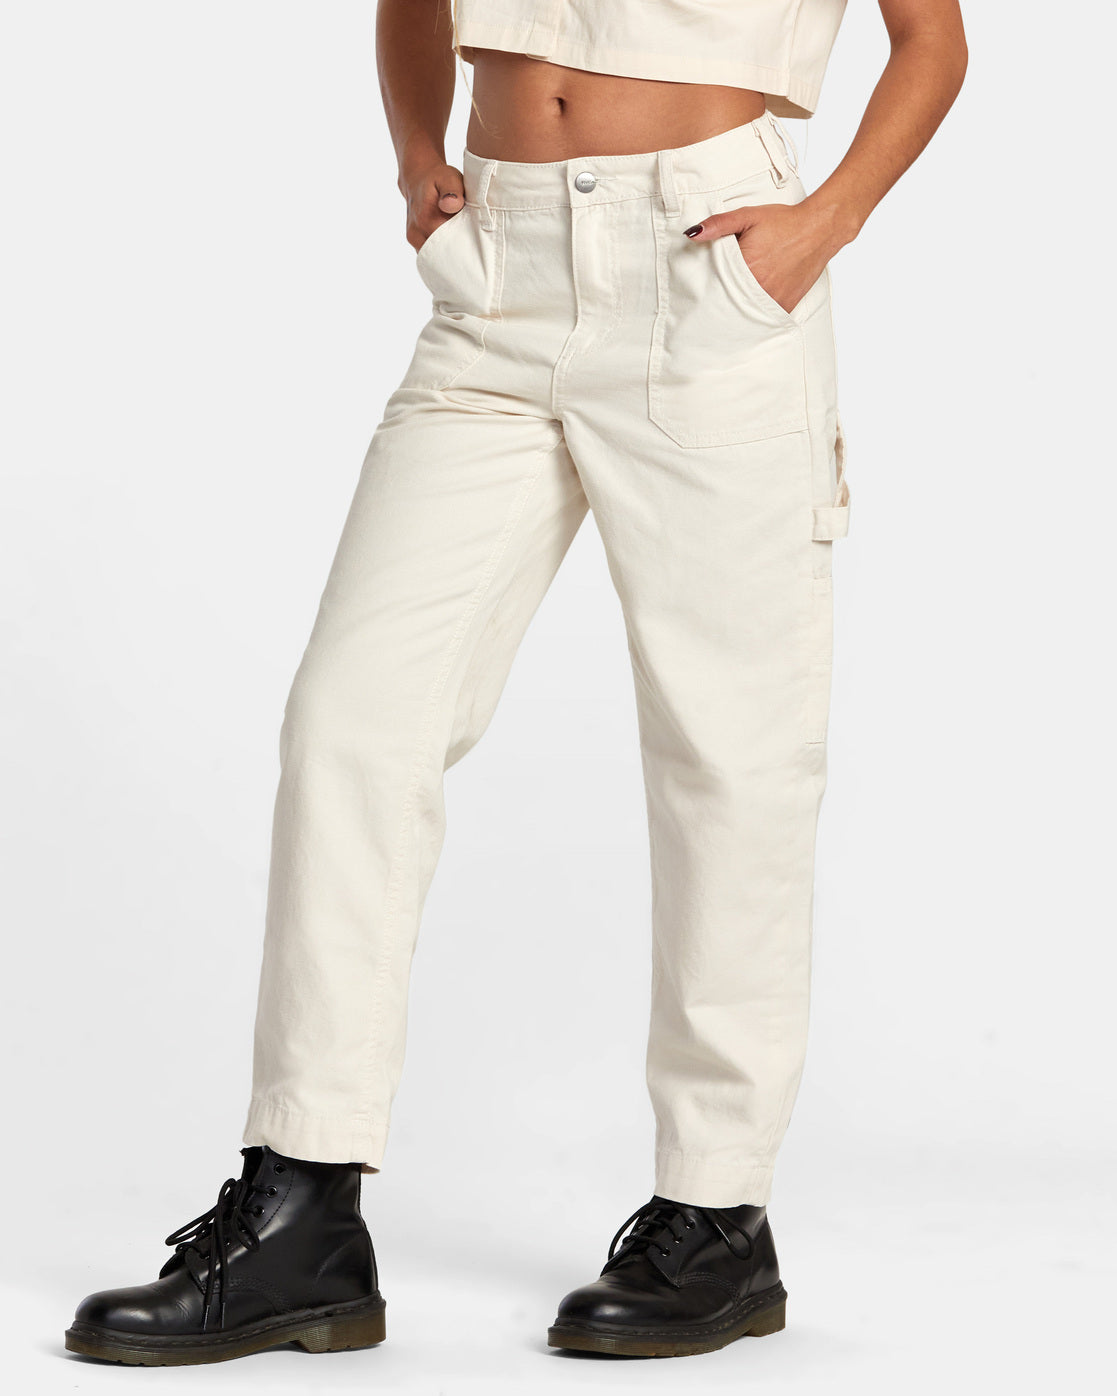 Recession Workwear Pants